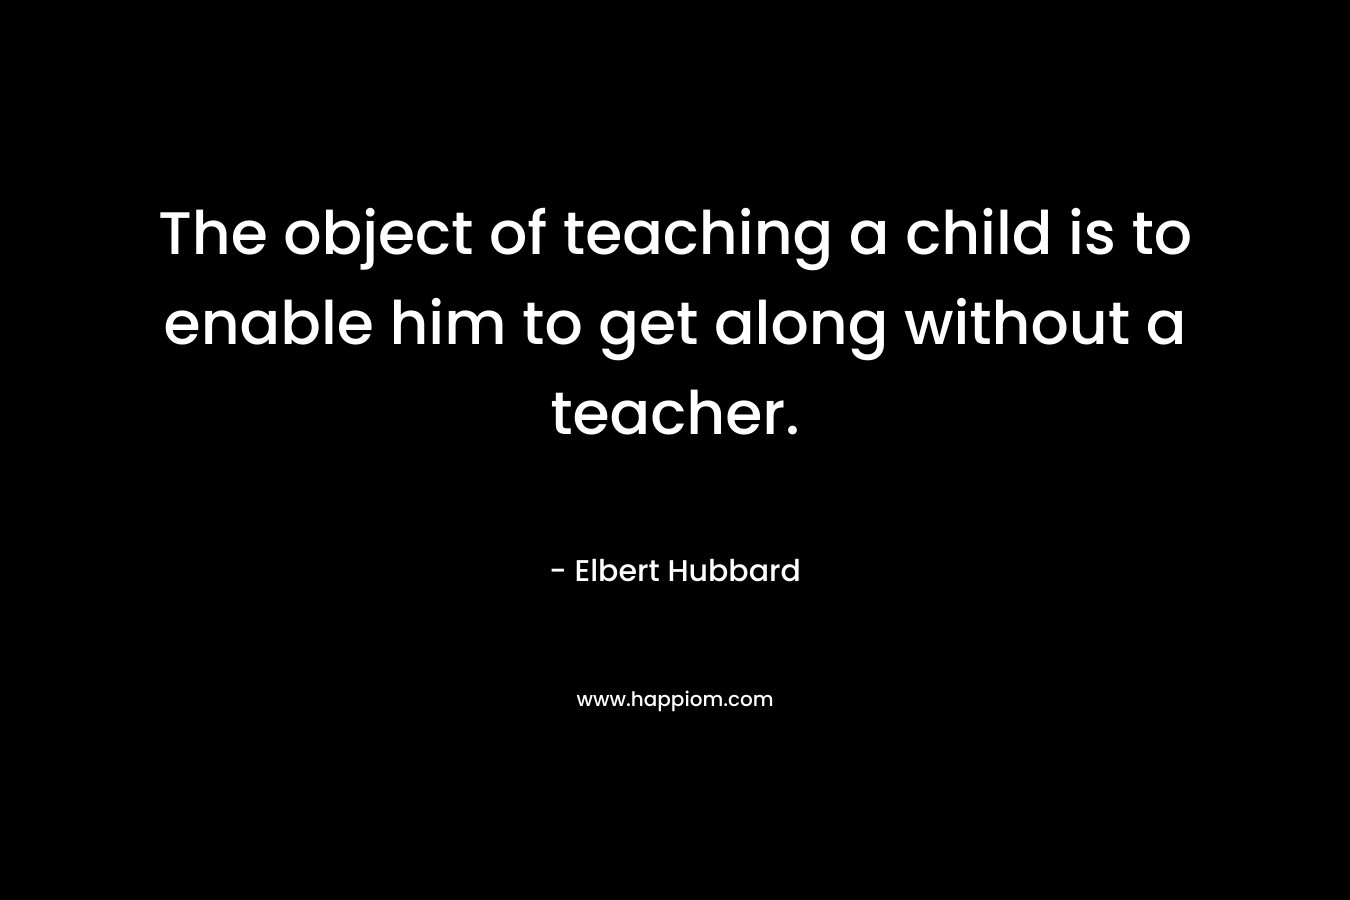 The object of teaching a child is to enable him to get along without a teacher. – Elbert Hubbard